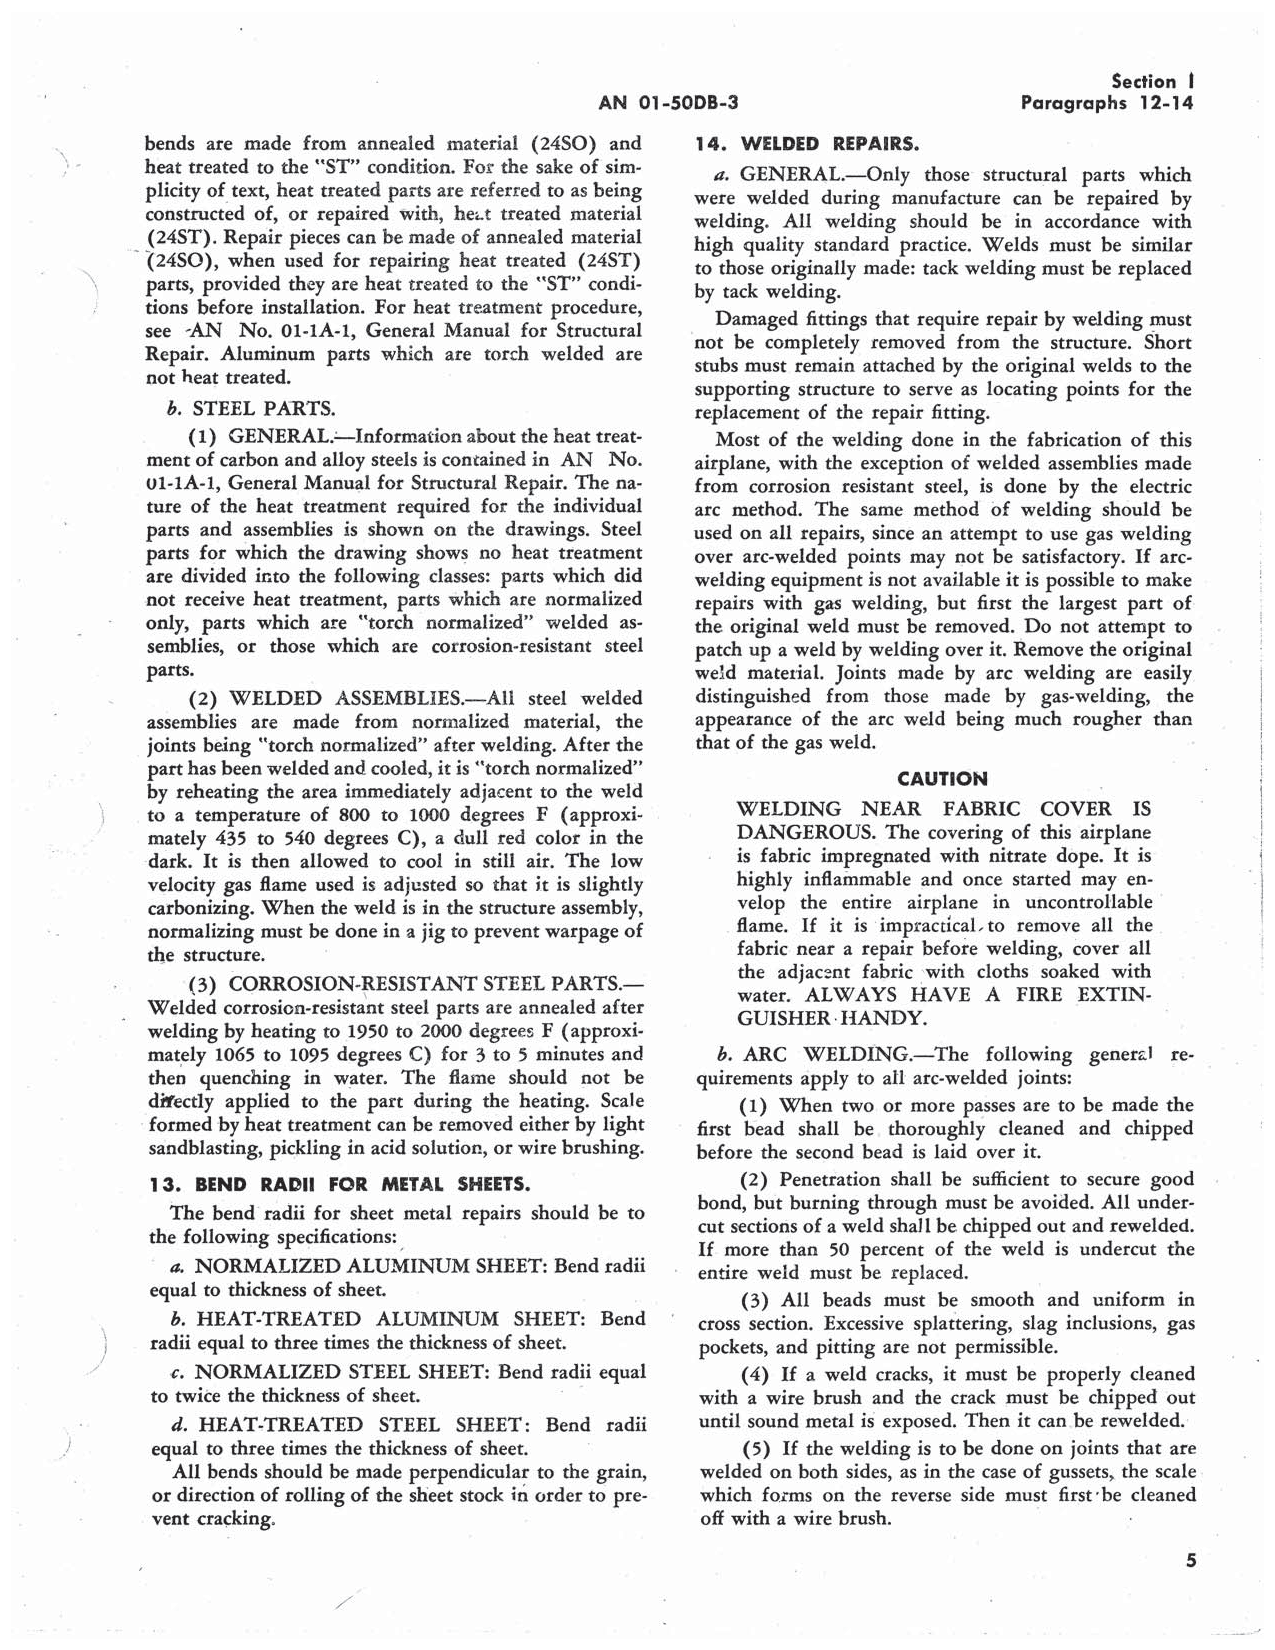 Sample page 11 from AirCorps Library document: Structural Repair Instructions - L-5 OY-1 OY-2